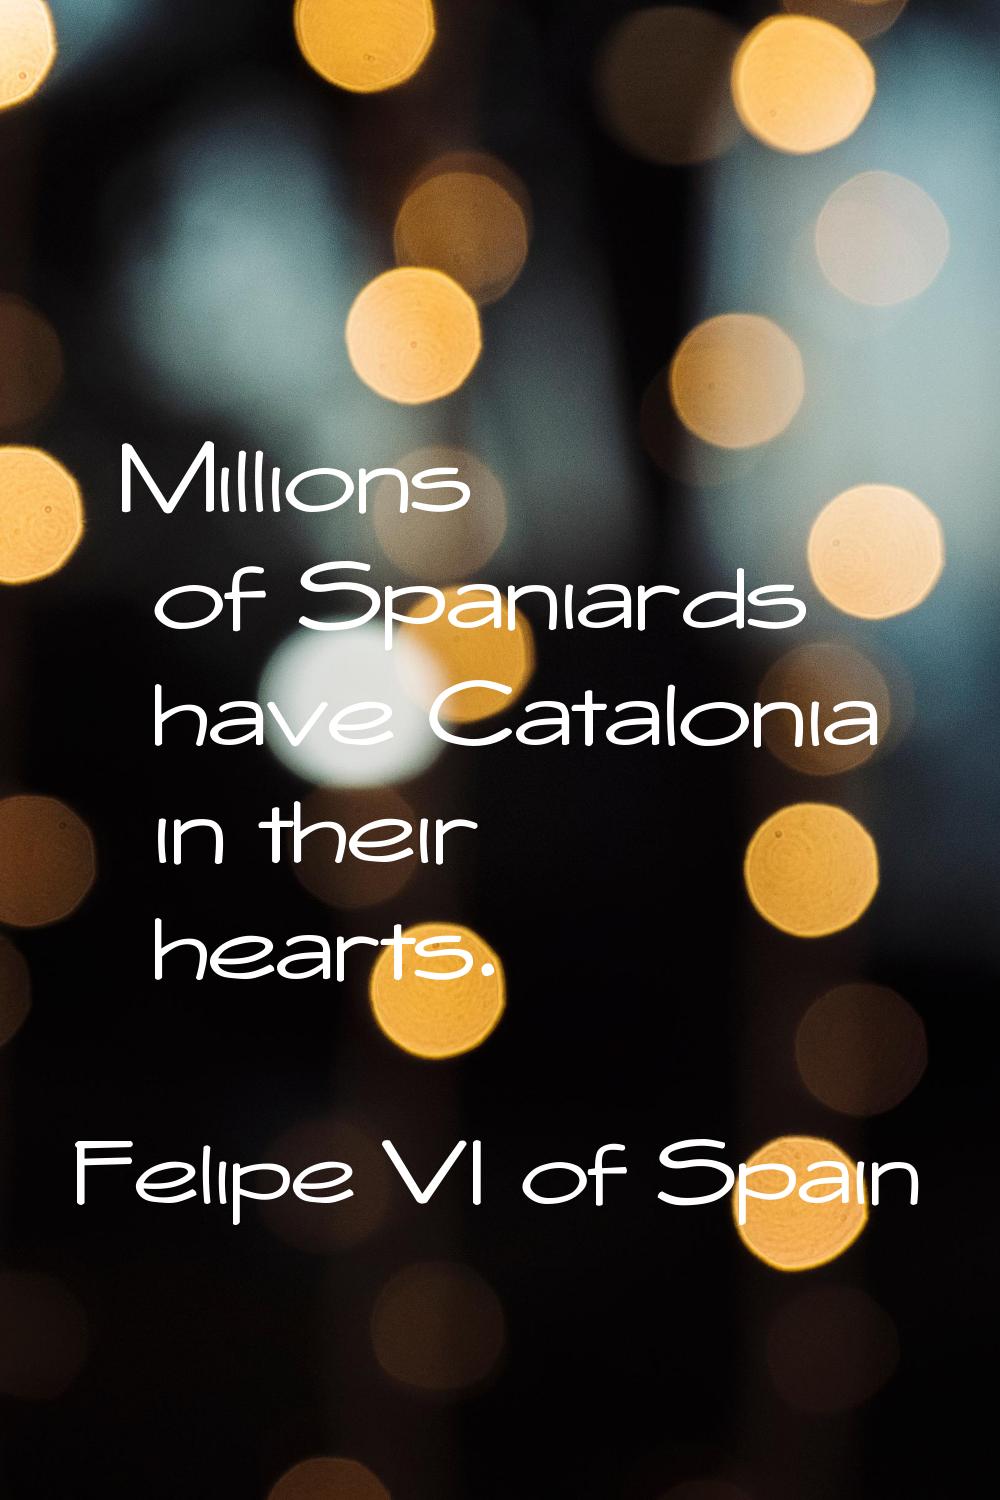 Millions of Spaniards have Catalonia in their hearts.